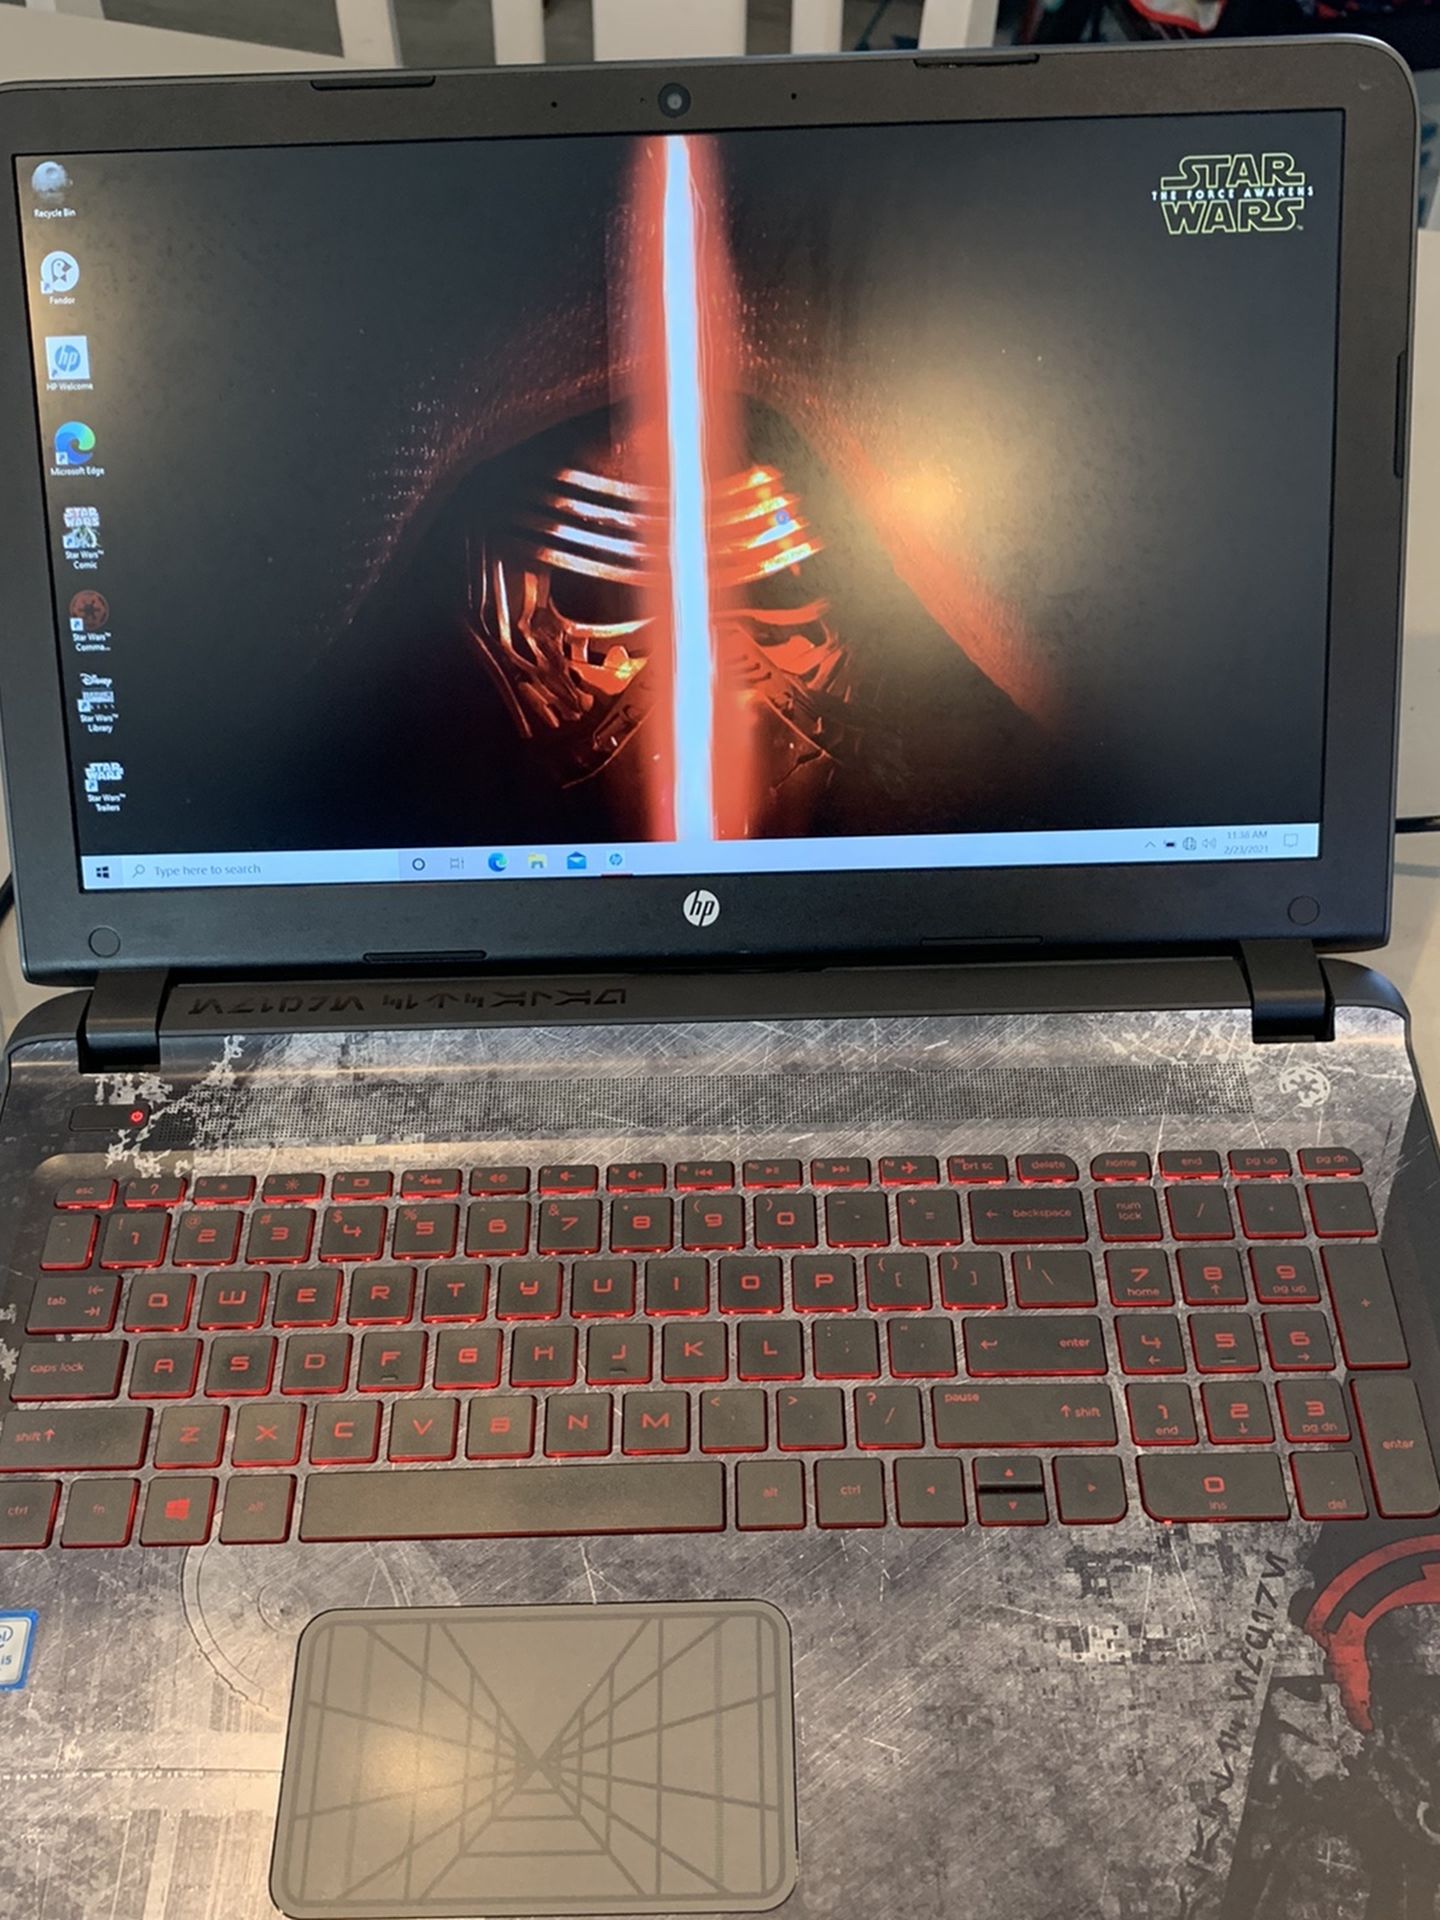 Limited Edition HP Starwars Laptop In Amazing Condition